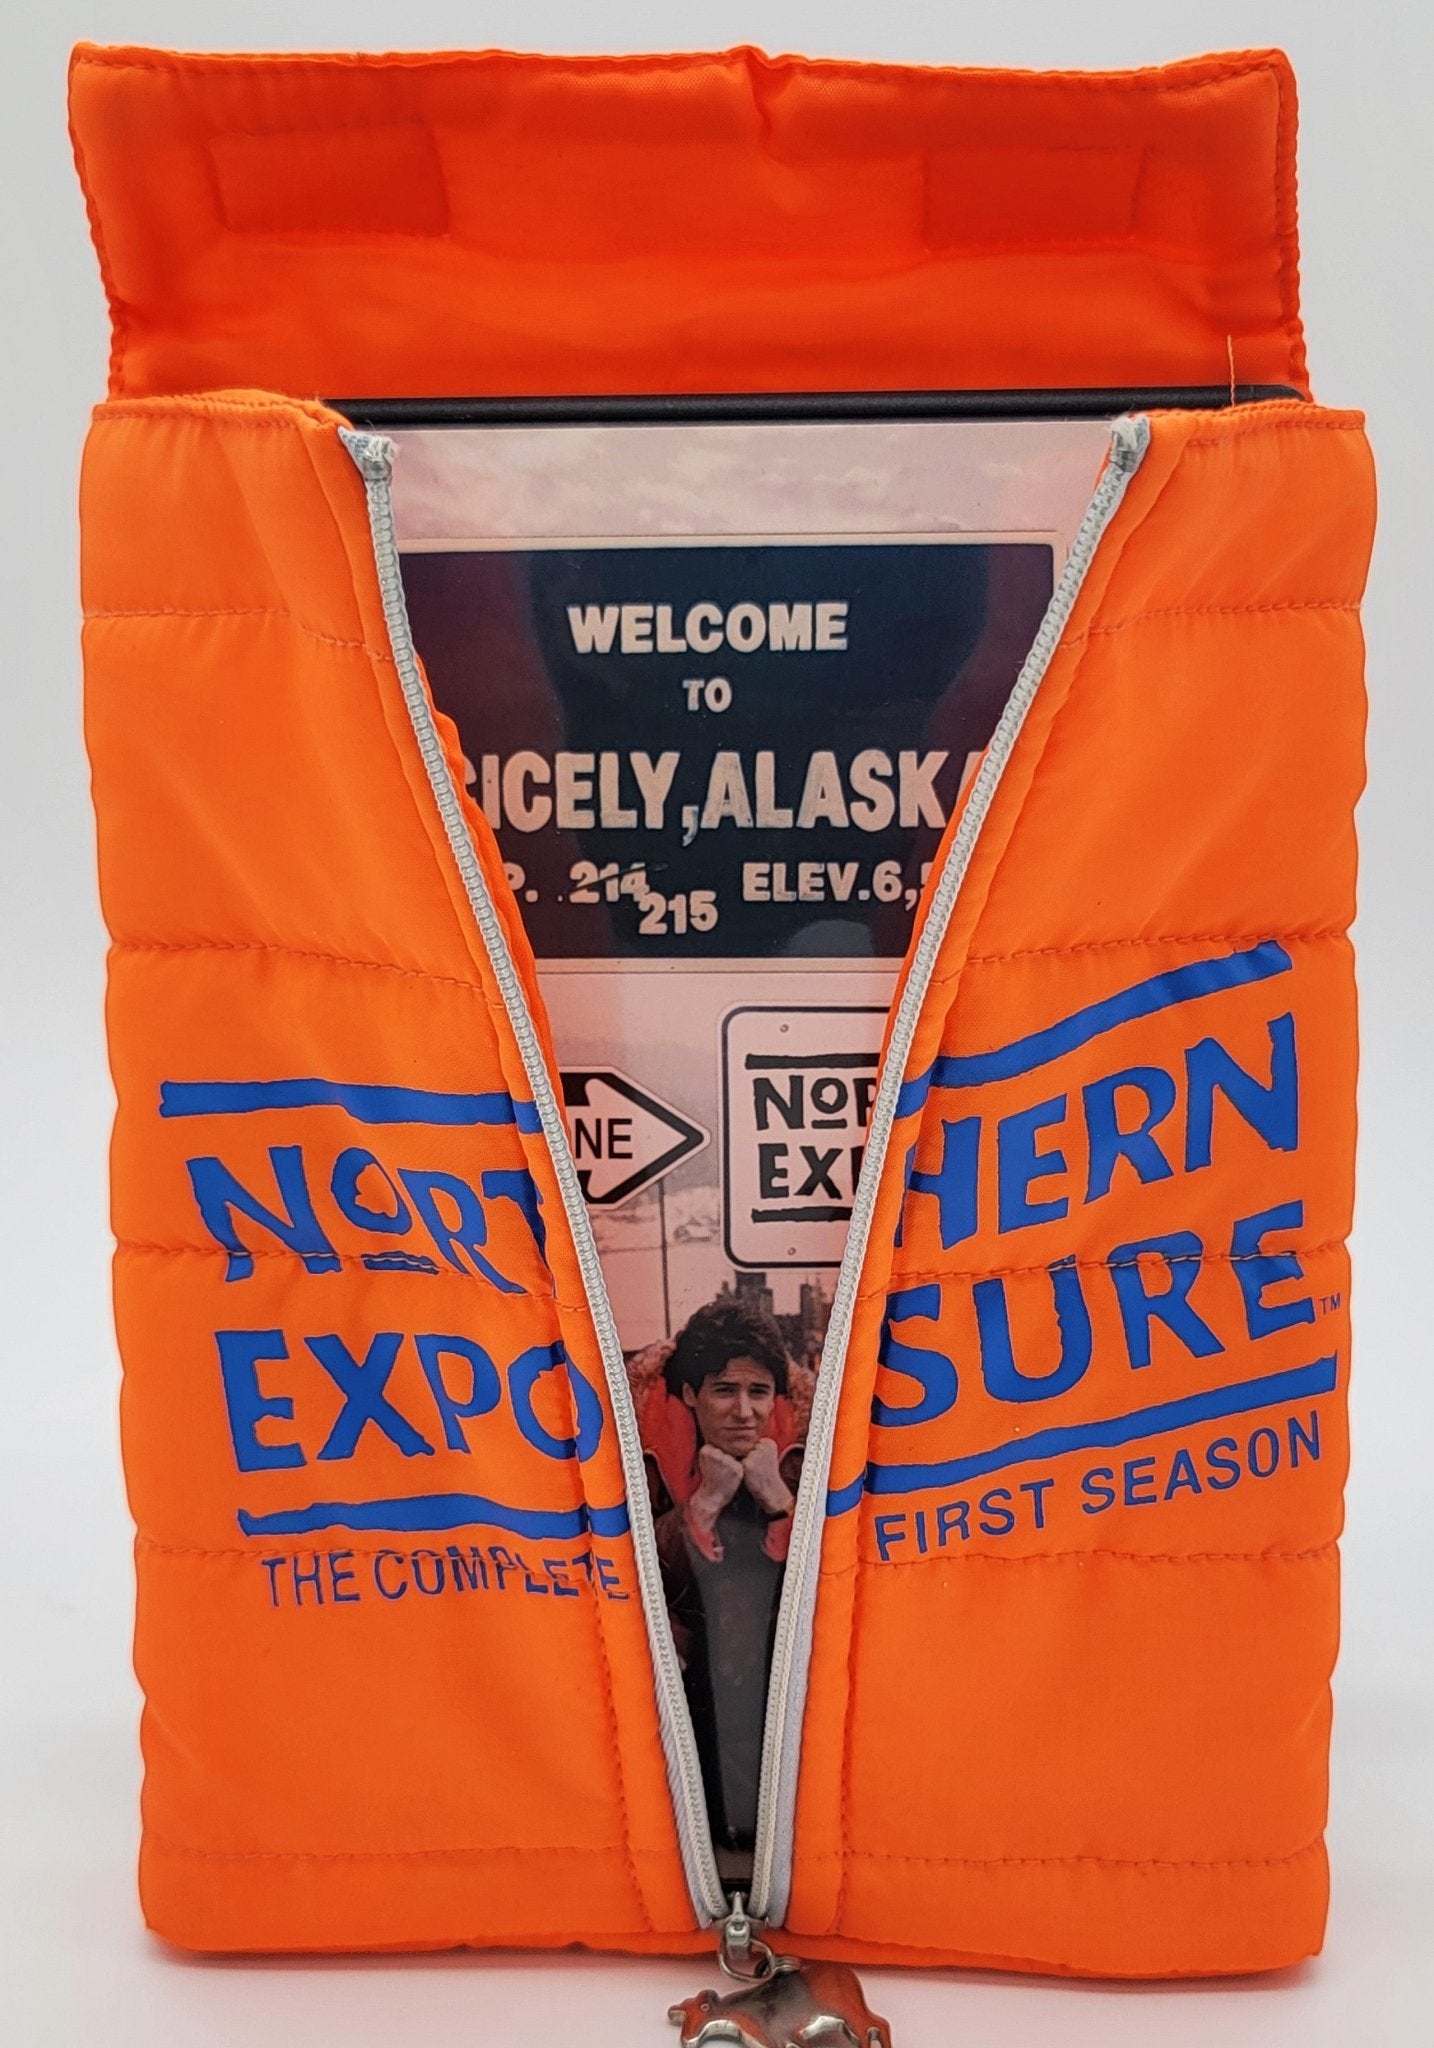 Universal Pictures Home Entertainment - Northern Exposure | DVD | The Complete First Season - Novelty Parka Orange Cover - DVD - Steady Bunny Shop